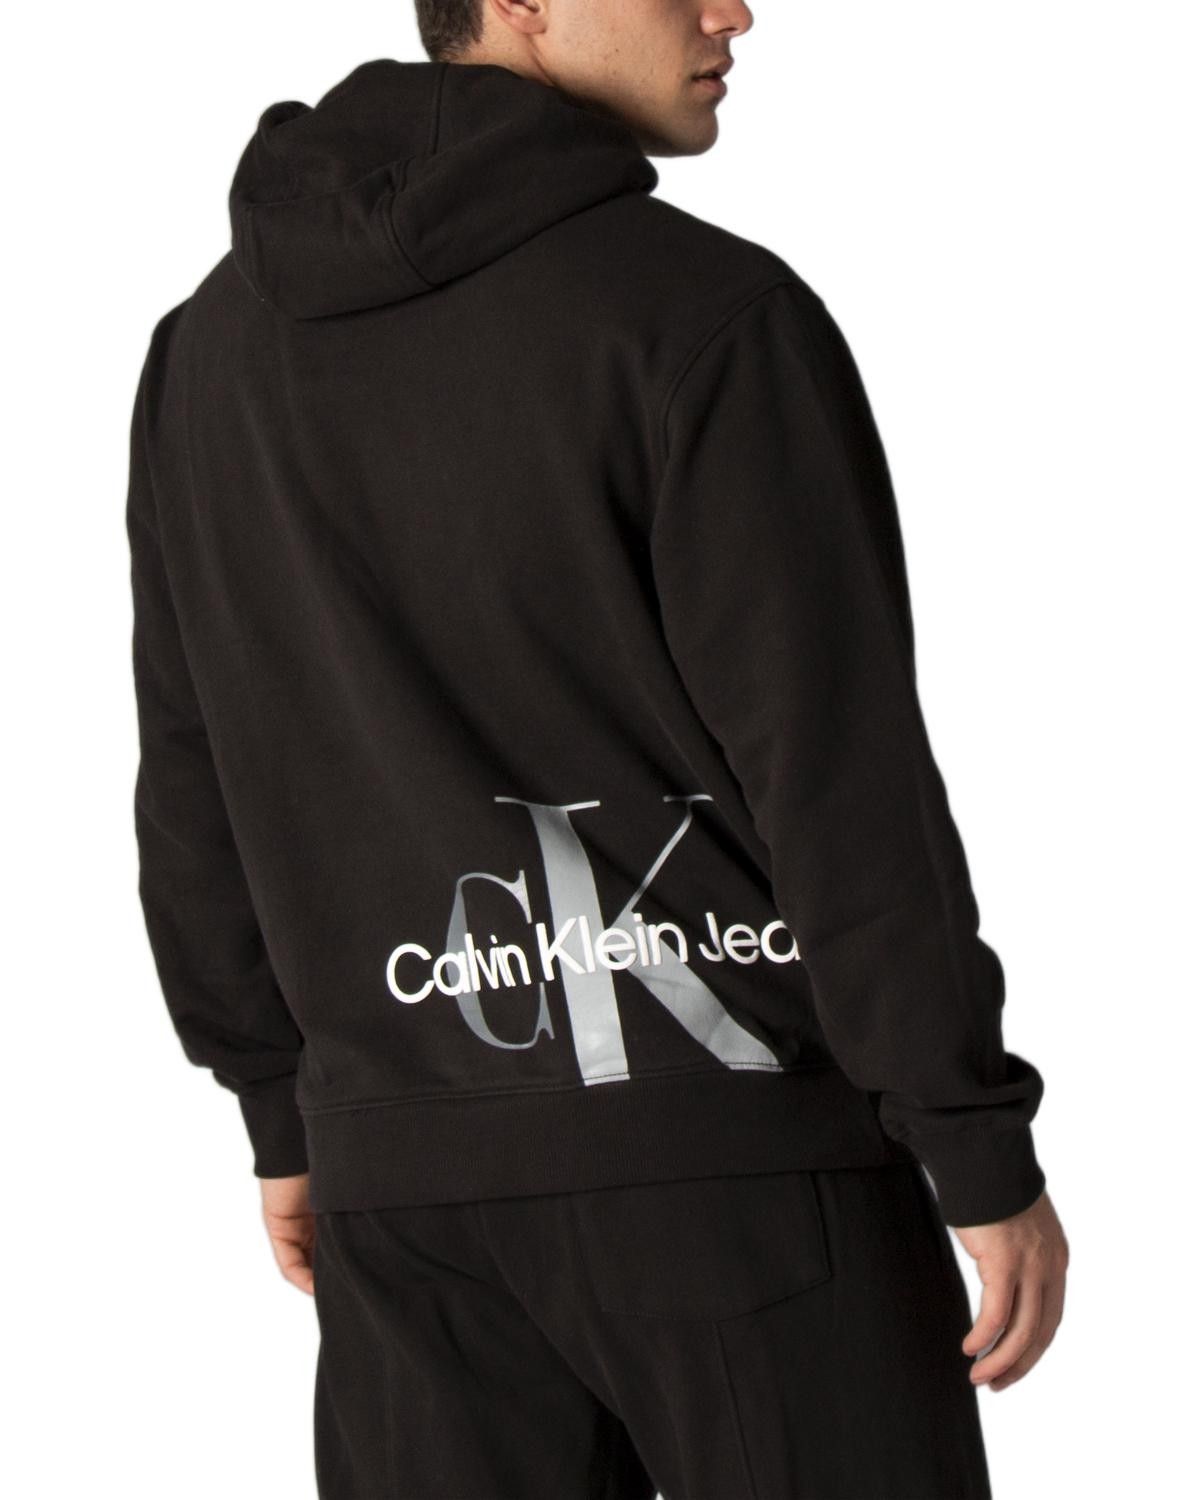 Brand: Calvin Klein Jeans
Gender: Men
Type: Sweatshirts
Season: Spring/Summer

PRODUCT DETAIL
• Color: black
• Pattern: print
• Sleeves: long
• Collar: hood

COMPOSITION AND MATERIAL
•  Washing: machine wash at 30°